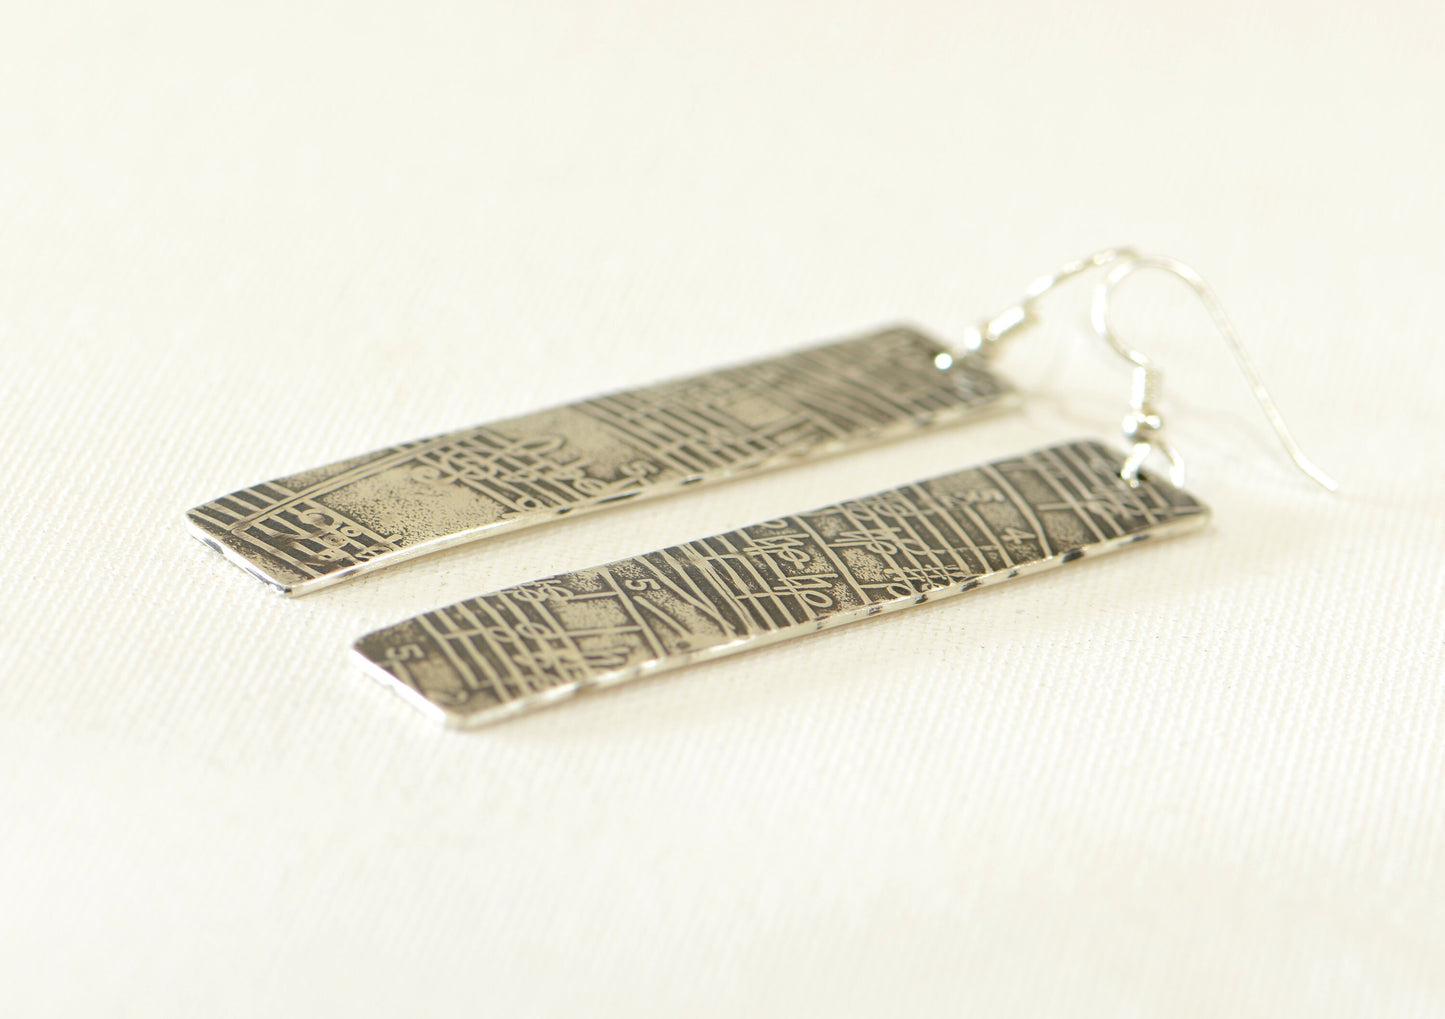 Musical Sterling Silver Earrings with Melodic Inspiration scrolled out on Antiqued Sheet Music Design